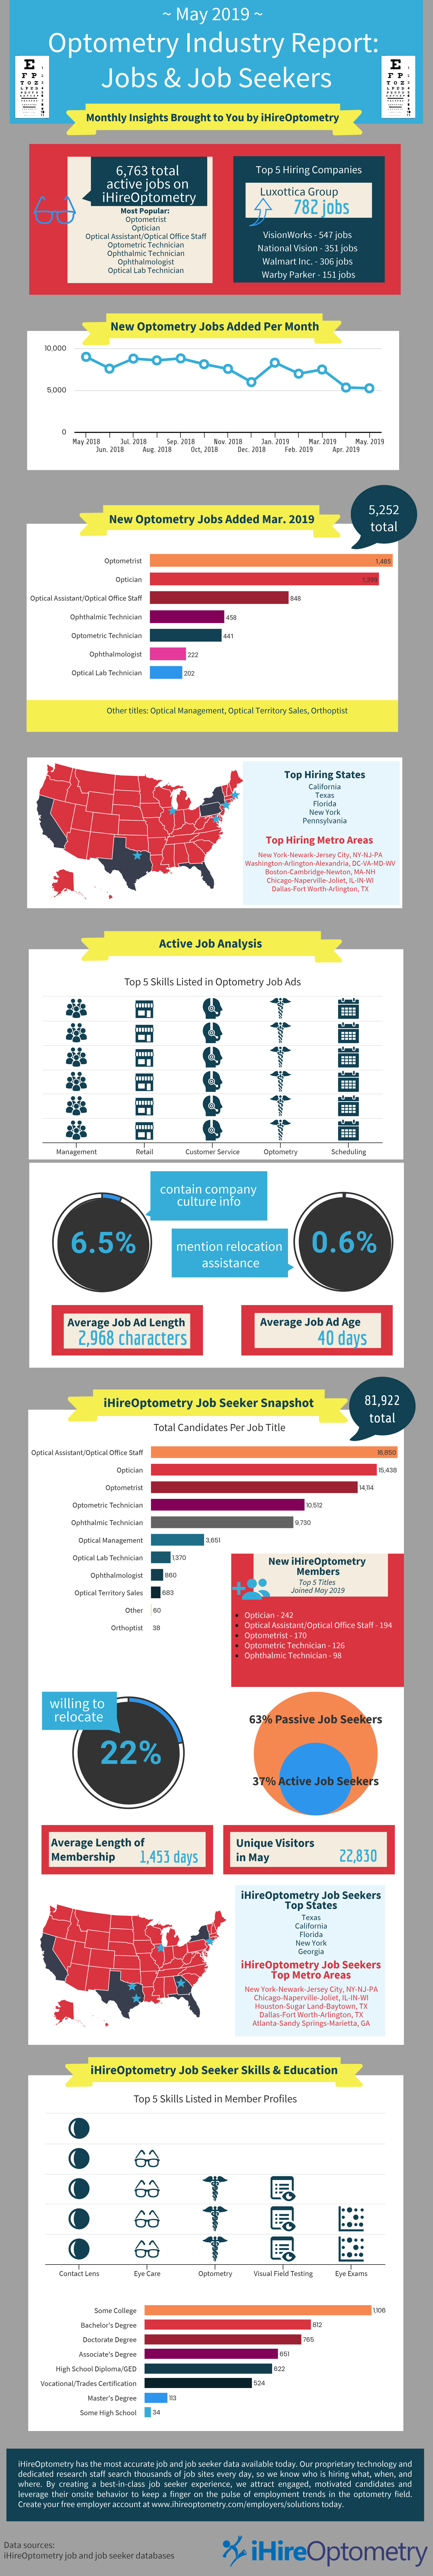 iHireOptometry’s eye care industry overview for May 2019. Infographic.